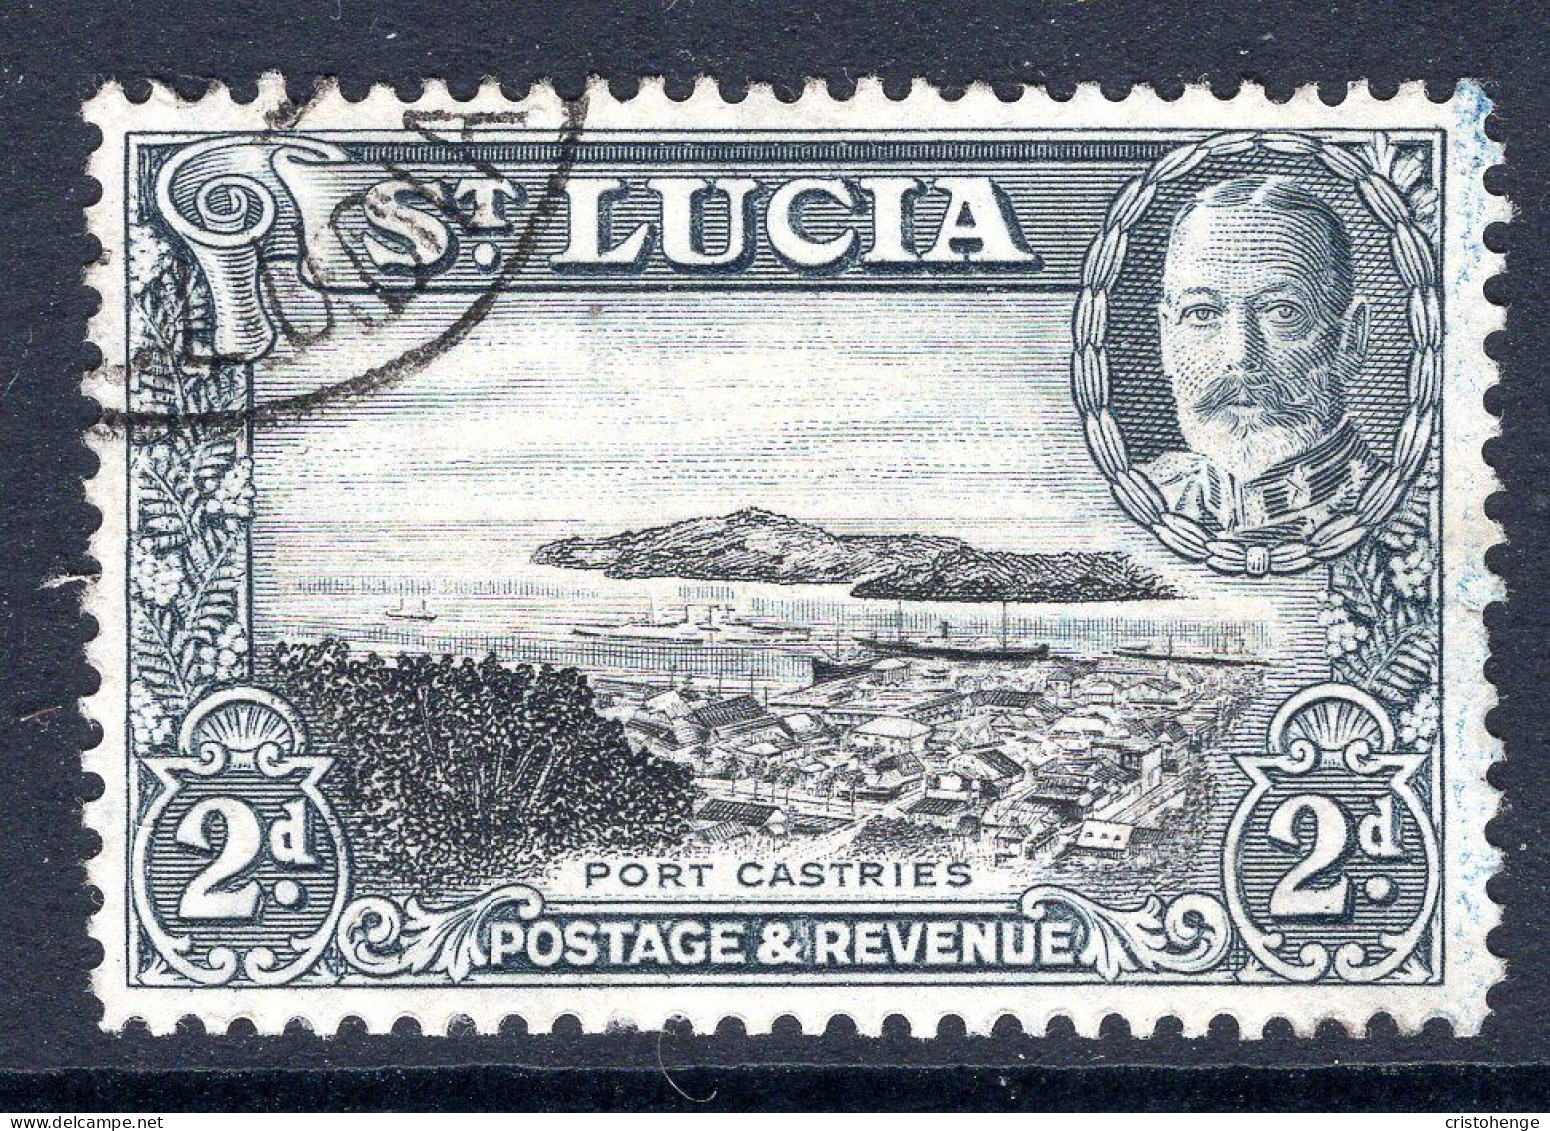 St Lucia 1936 KGV Pictorials - P.14 - 2d Port Castries Used (SG 116) - Ste Lucie (...-1978)